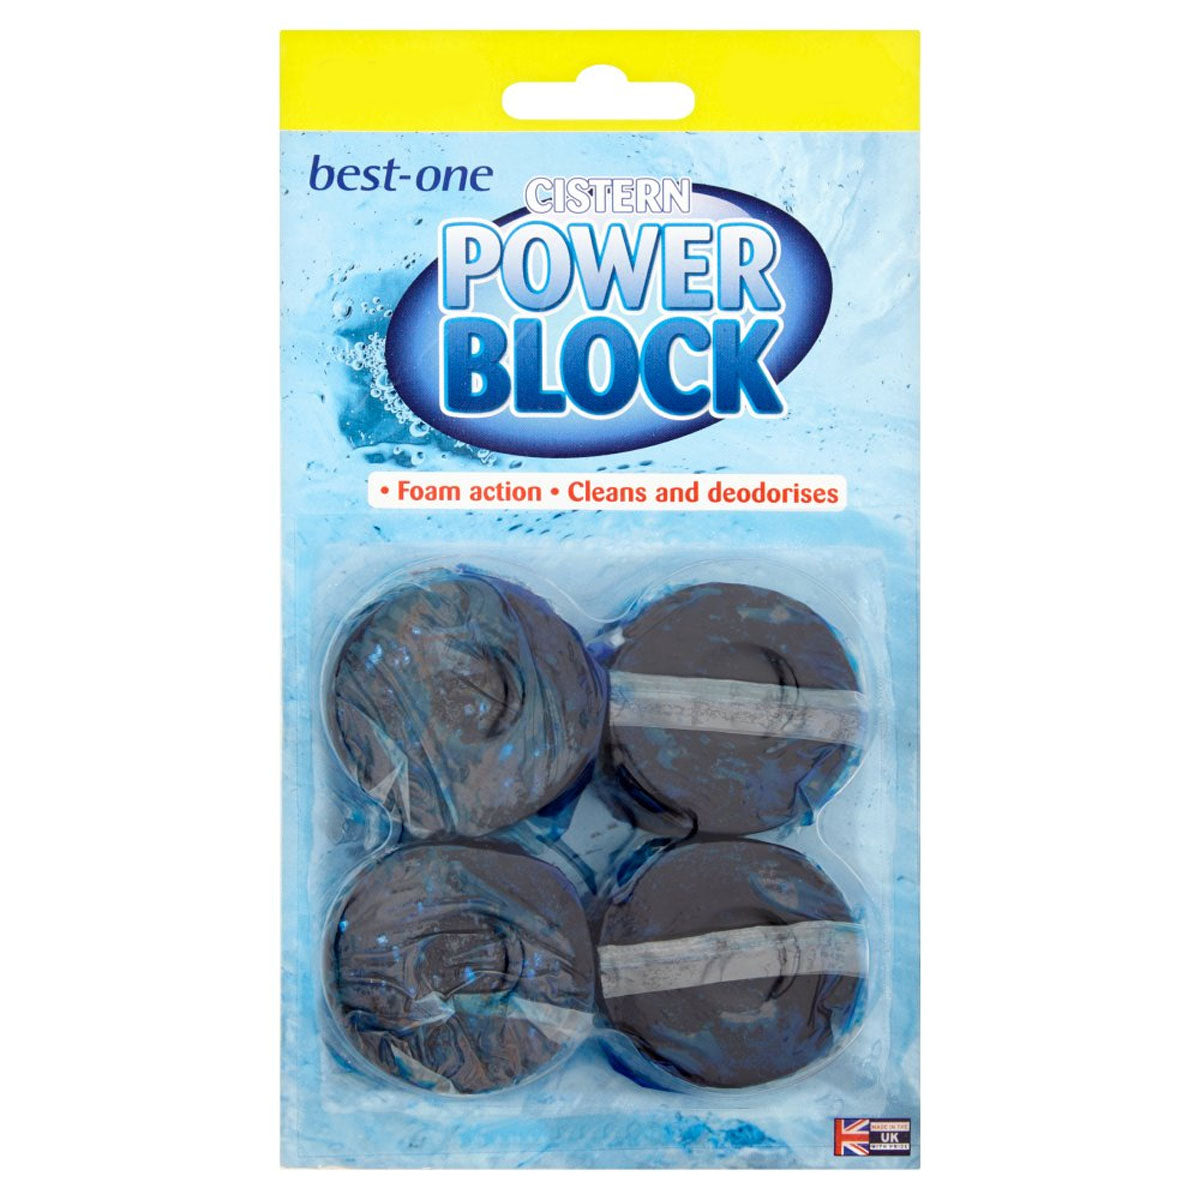 Best-One - Cistern Power Block - 4 x 50g - Continental Food Store